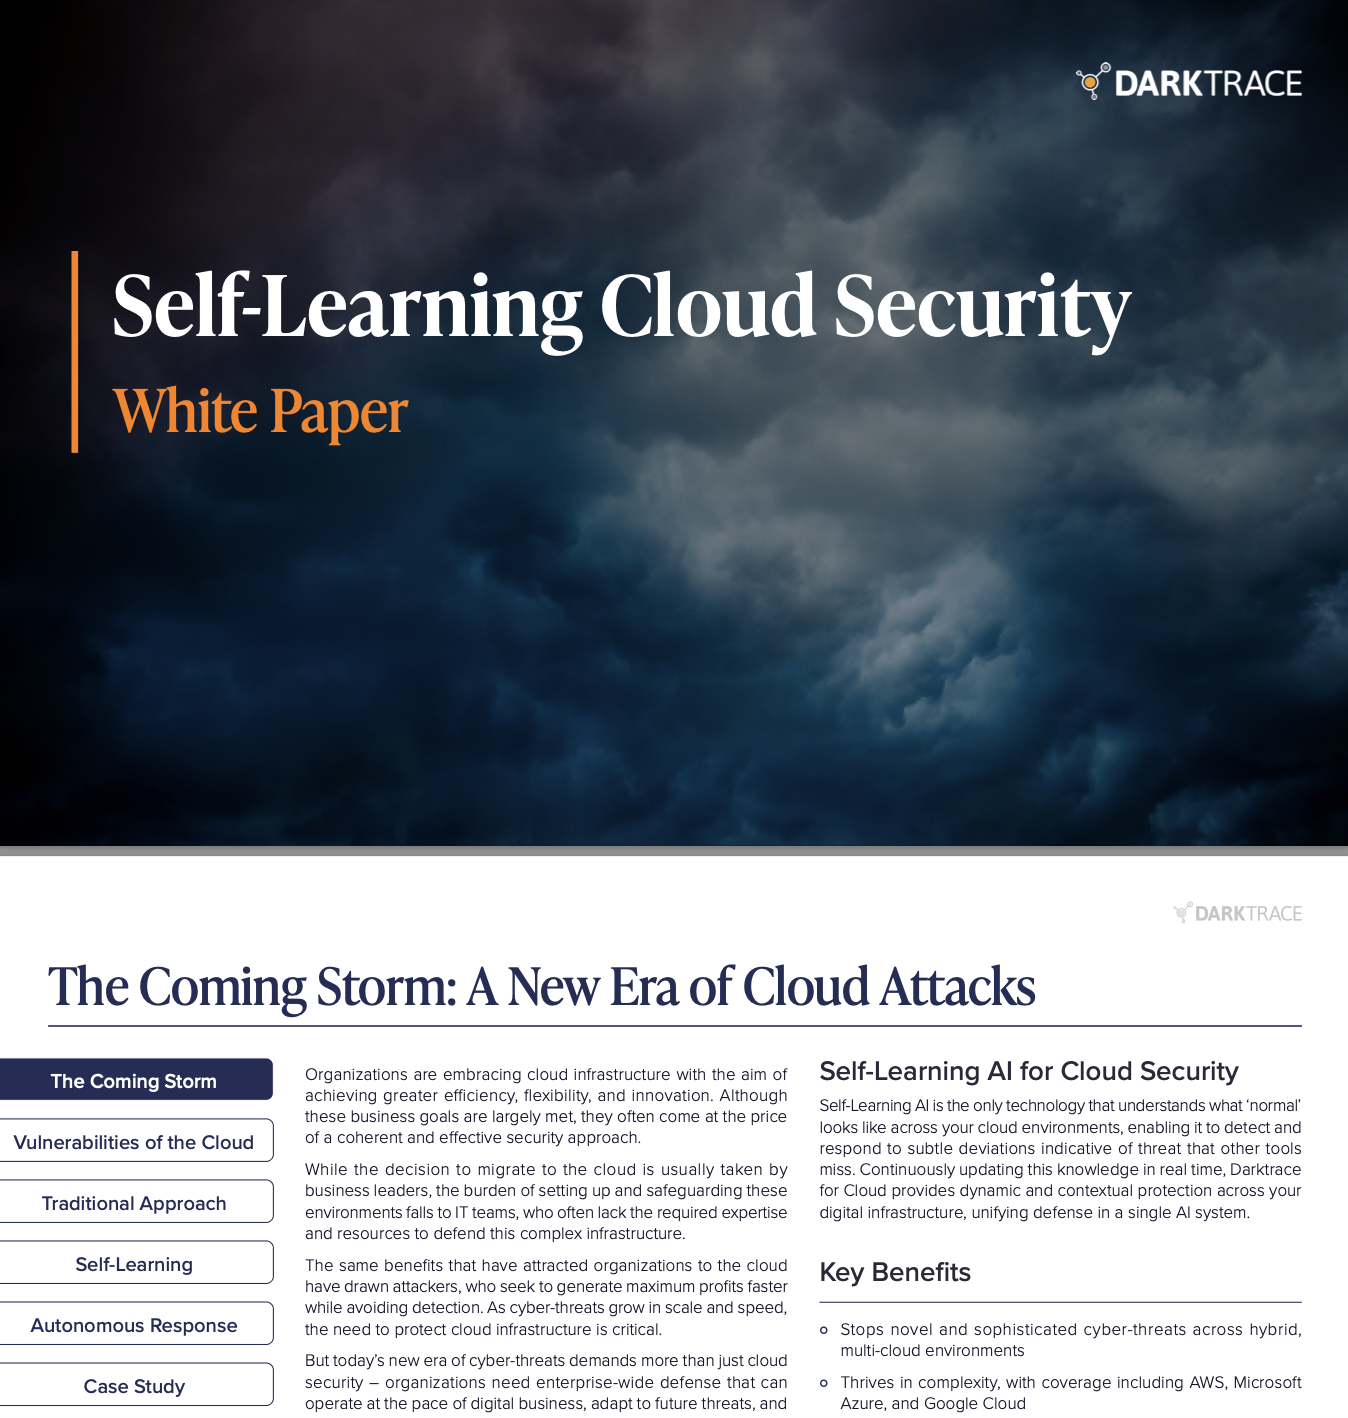 Self-Learning Cloud Security